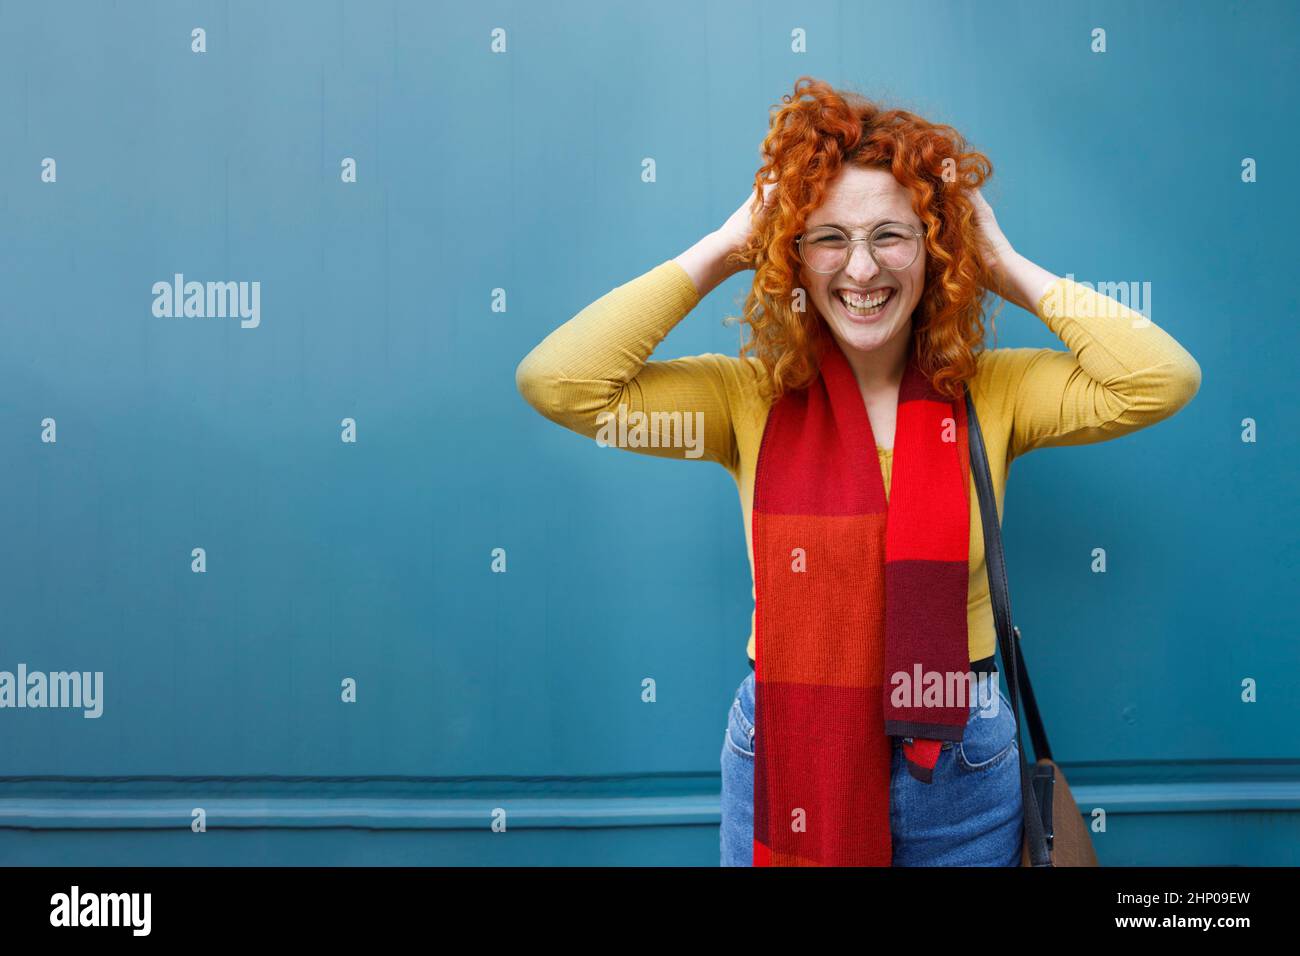 Funny curly woman fooling around and having a blast Stock Photo